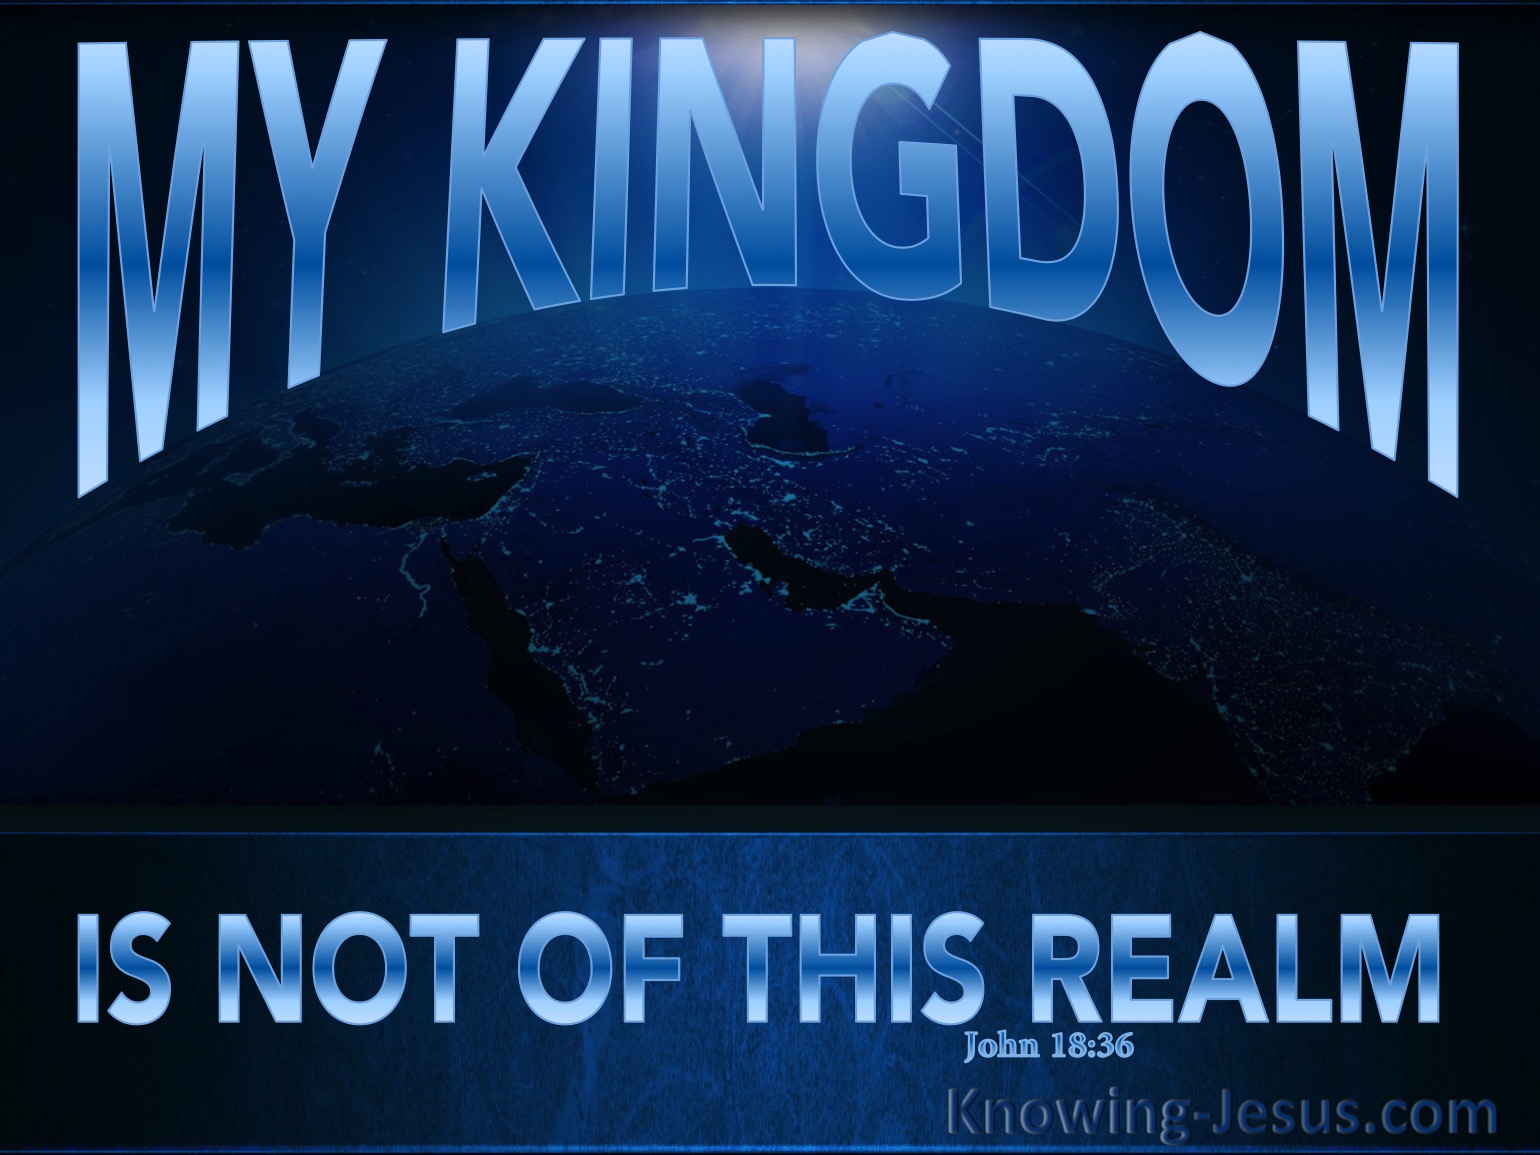 Jesus answered, My kingdom is not of this world: if my kingdom were of this  world, then would my servants fight, that I…